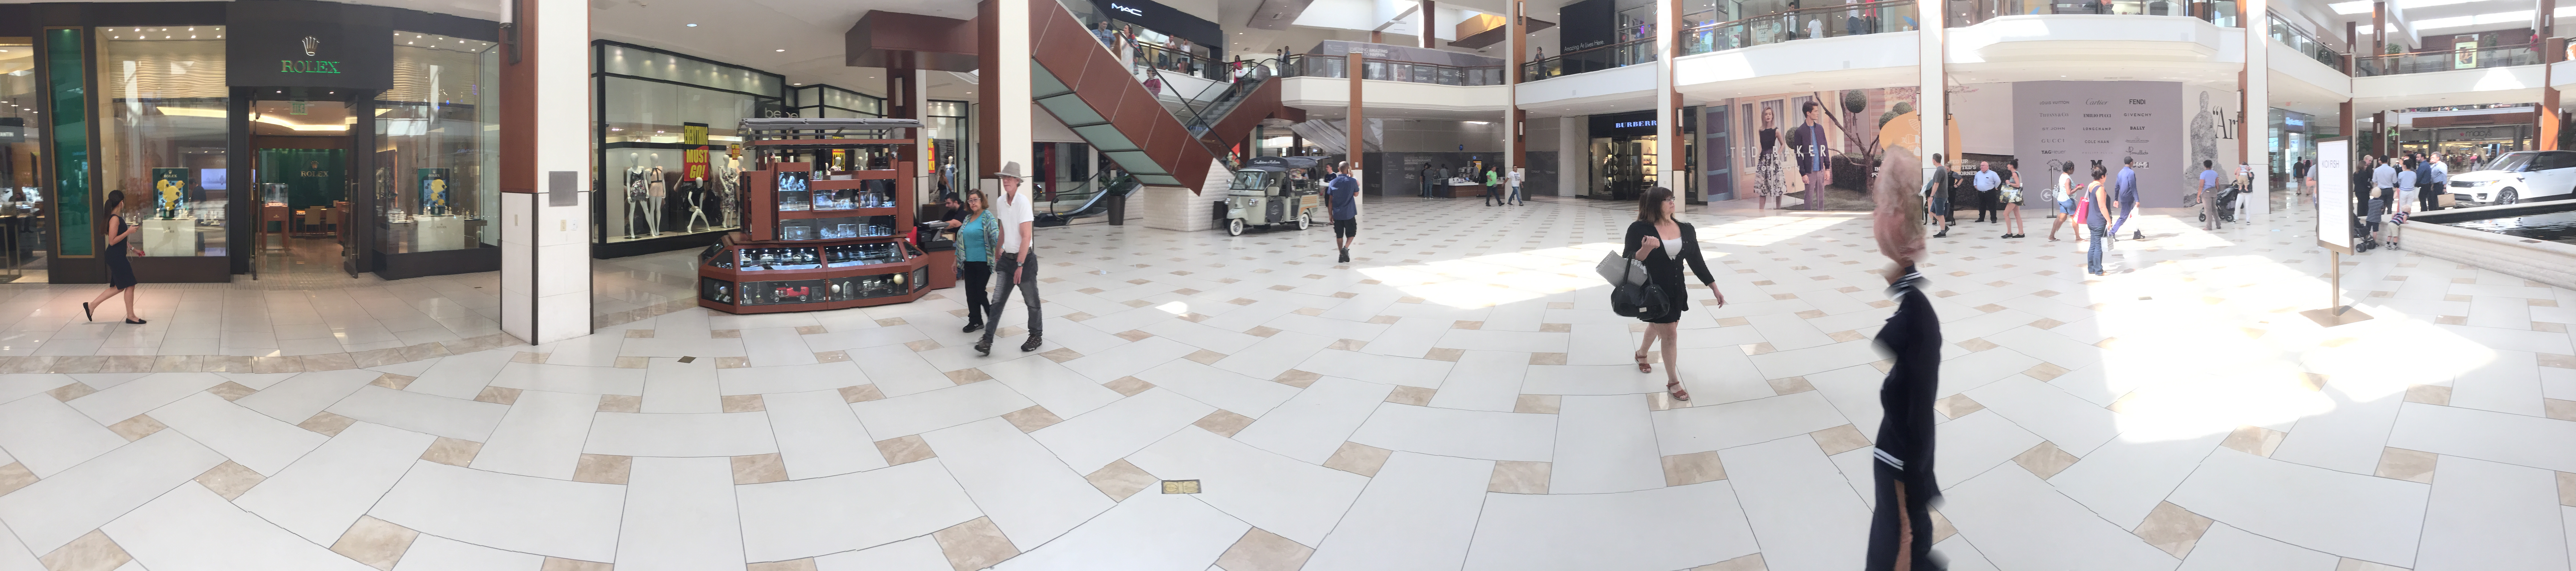 Location Scouting Indoor Mall